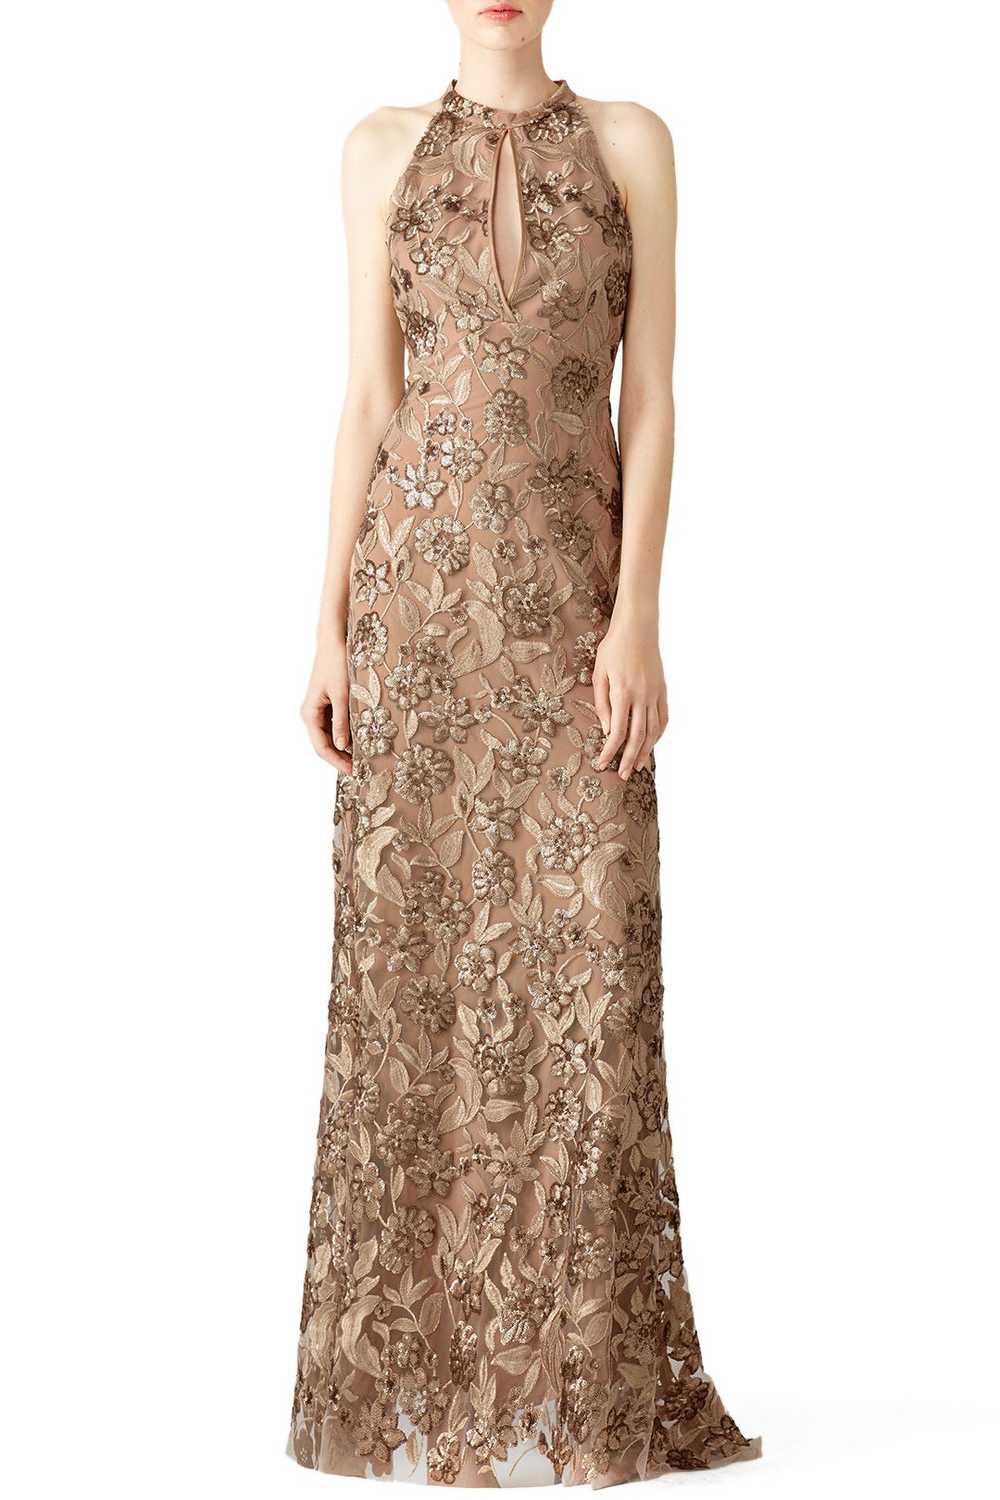 ERIN erin fetherston Gold Joan Gown - image 1